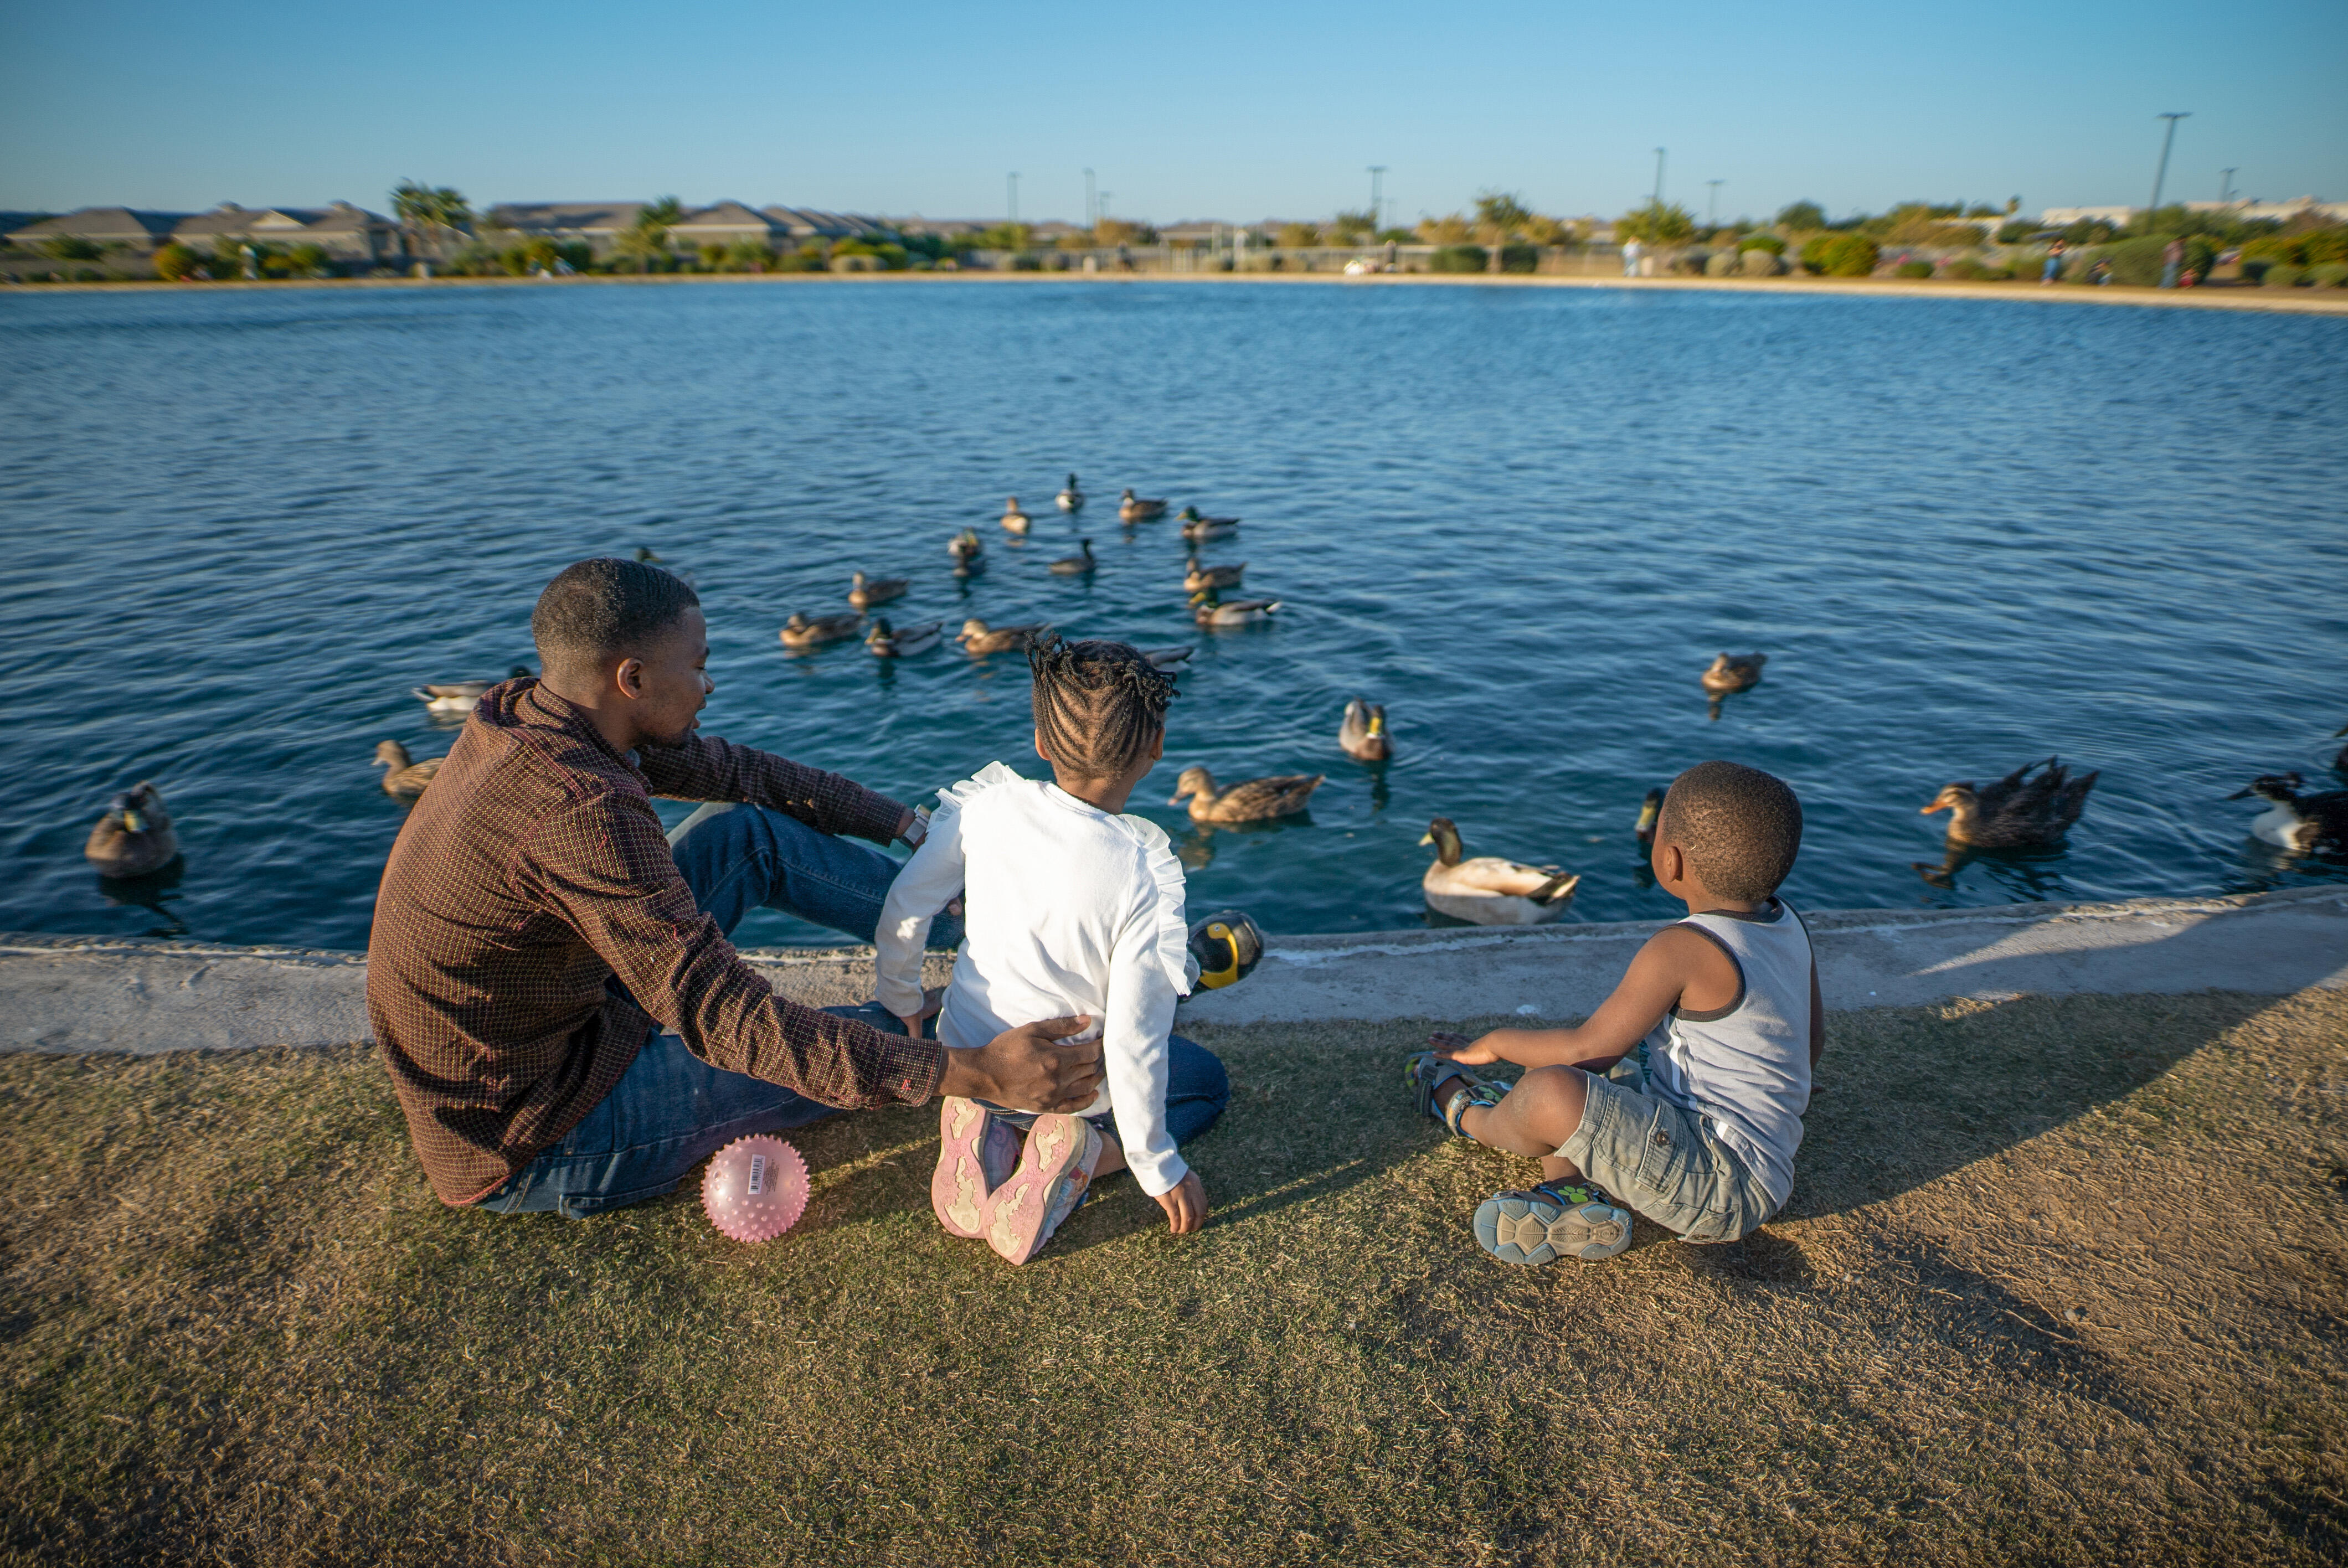 Congolese refugee Robert Sebatware sits with his two young children watching ducks swim in a pond in Phoenix, Arizona